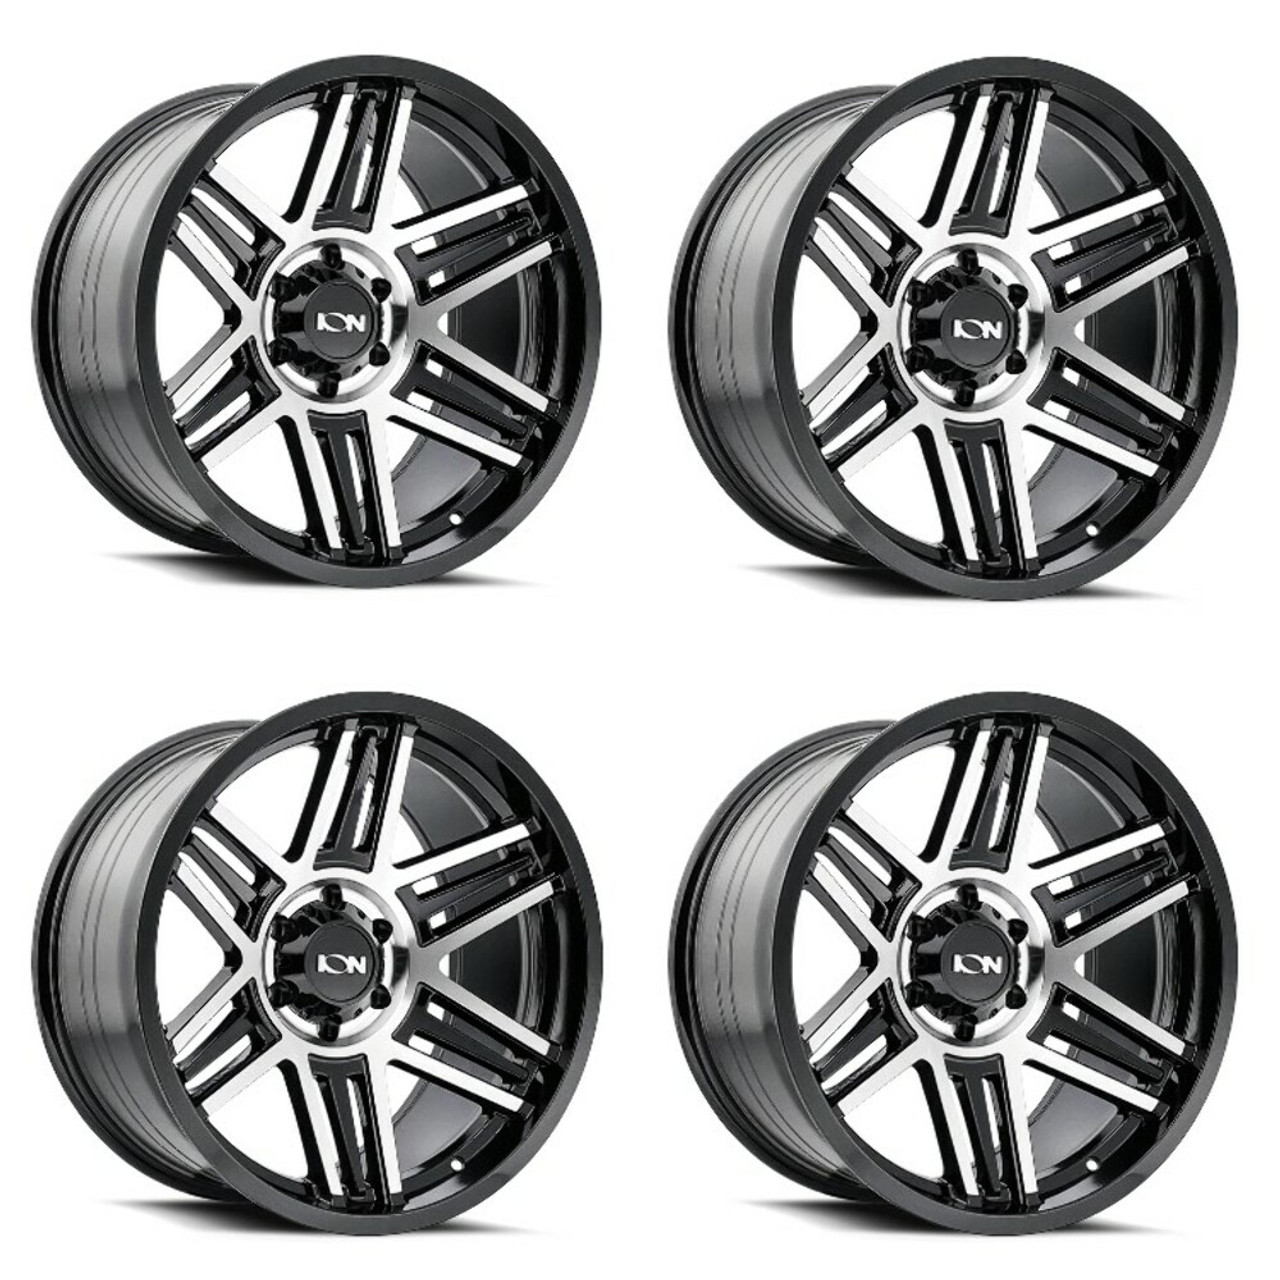 Set 4 20" Ion 147 20x9 Black Machined 8x170 Wheels 18mm For Ford Truck Rims